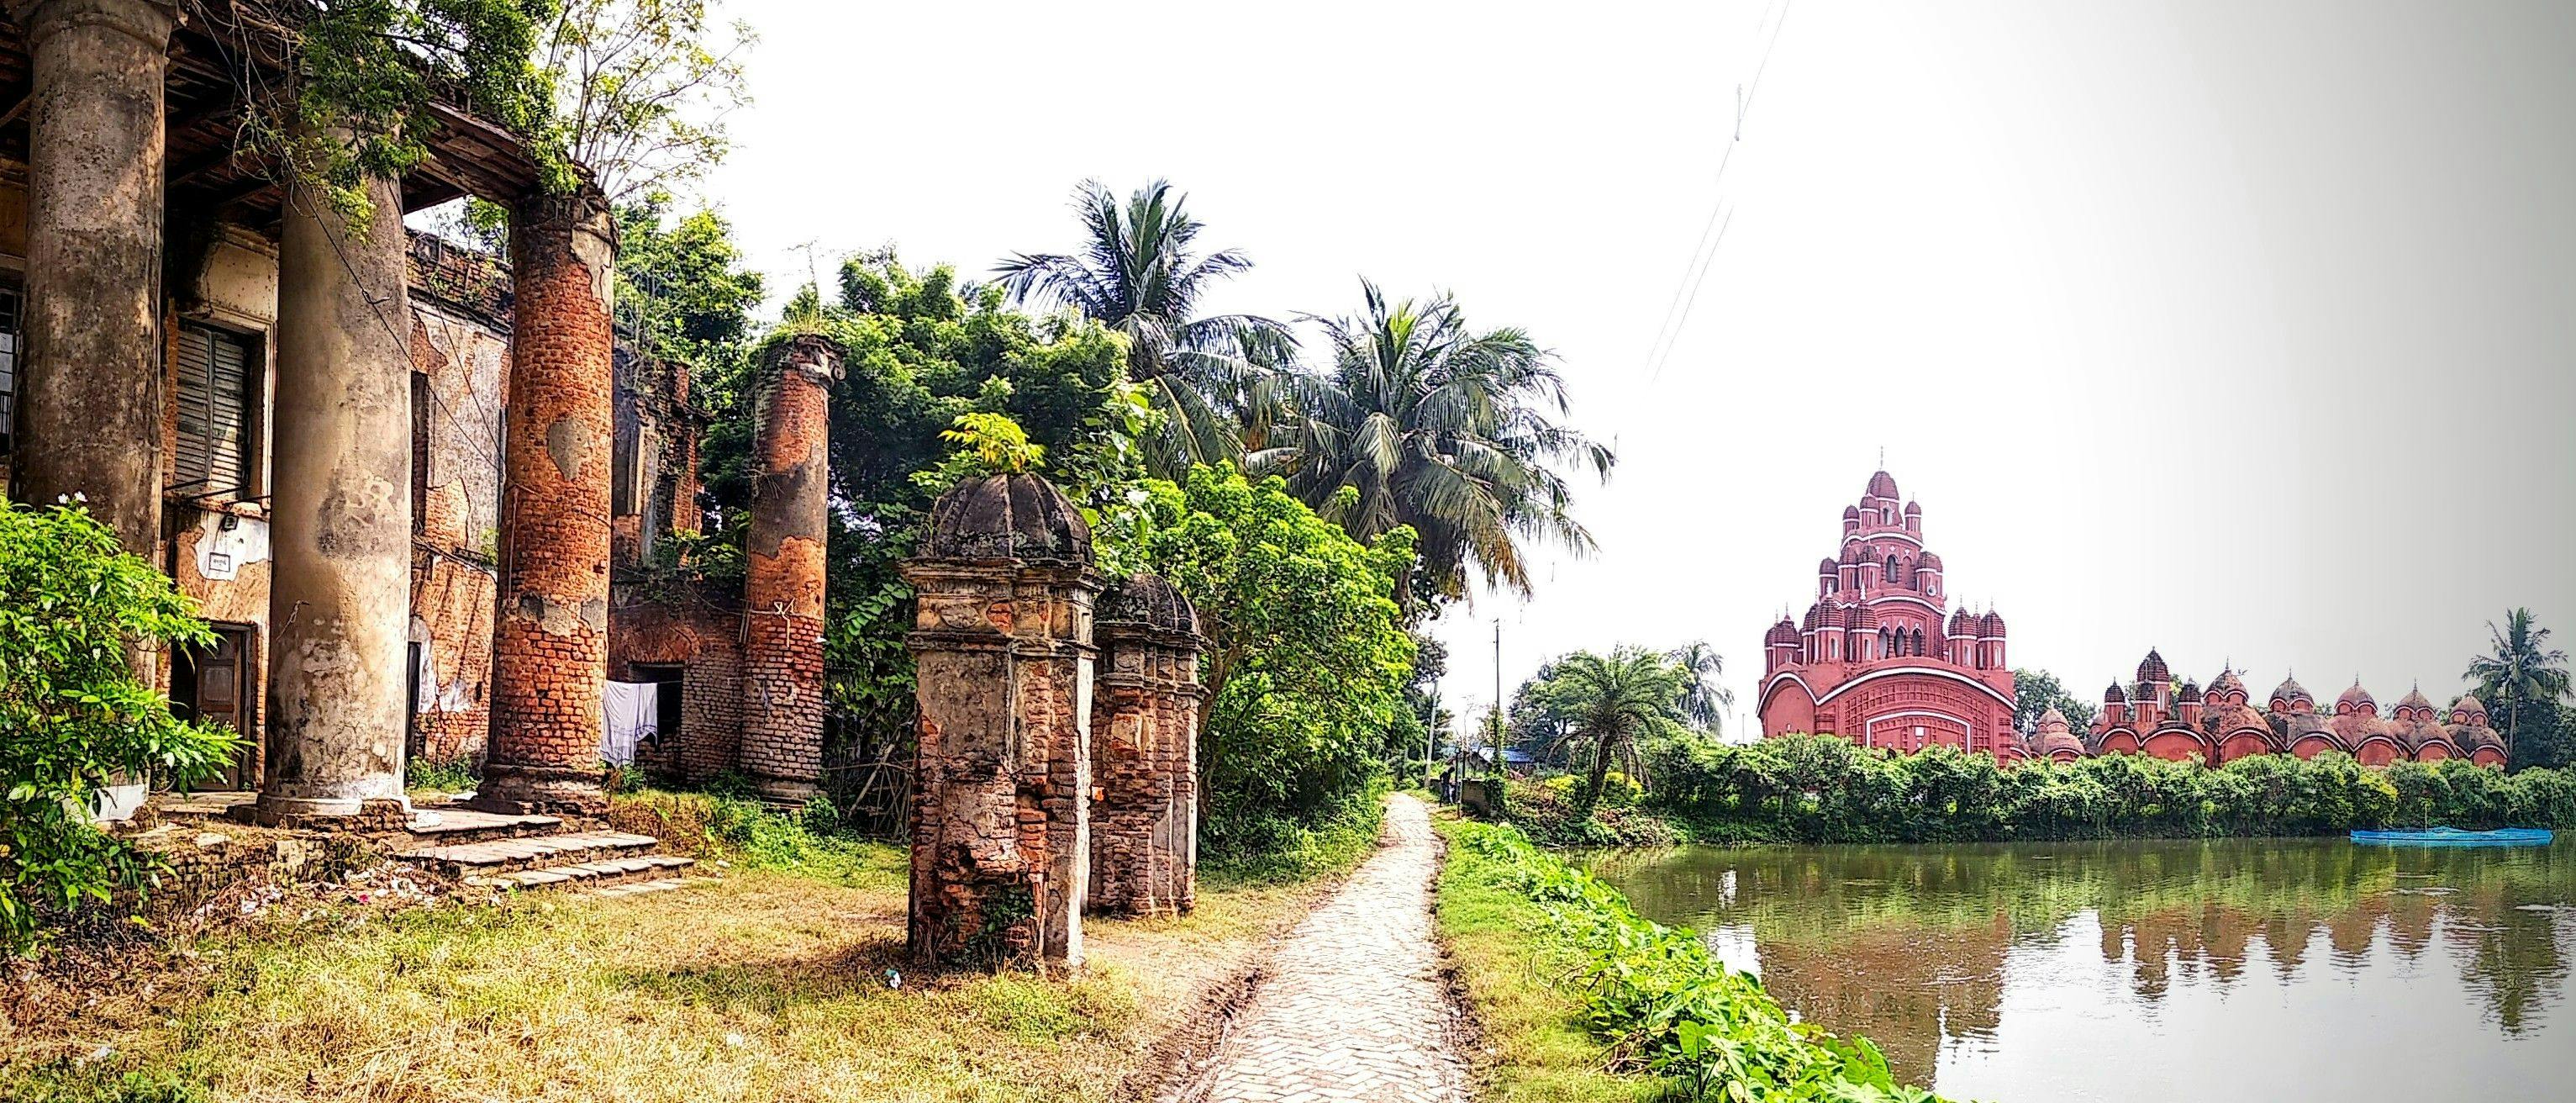 The huge columns of the Mustafi family mansion, Radha Kunja, and Ananda Bhairavi Temple complex on the banks of an adjacent water body in Sukharia-Somra